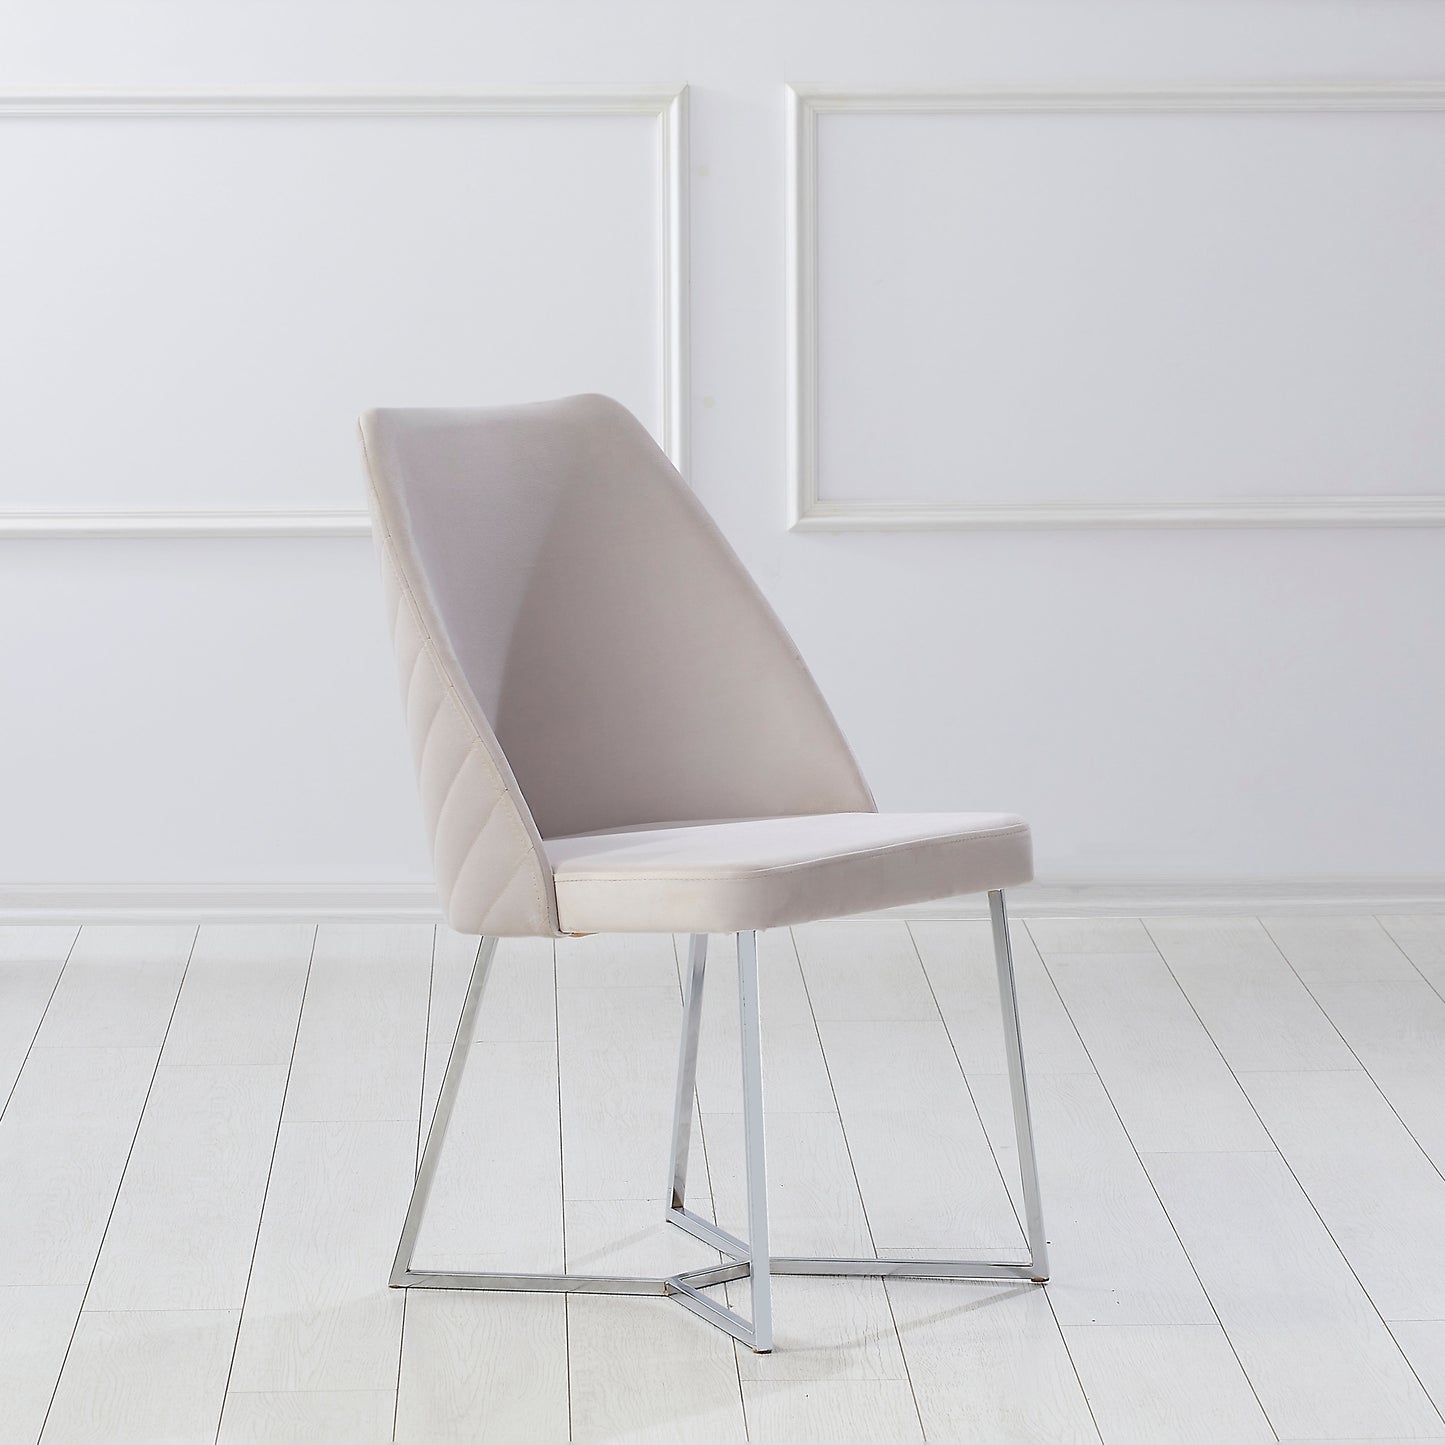 Right angled single chair only from a set of two contemporary white microfiber and silver dining chairs in an empty room with white floors